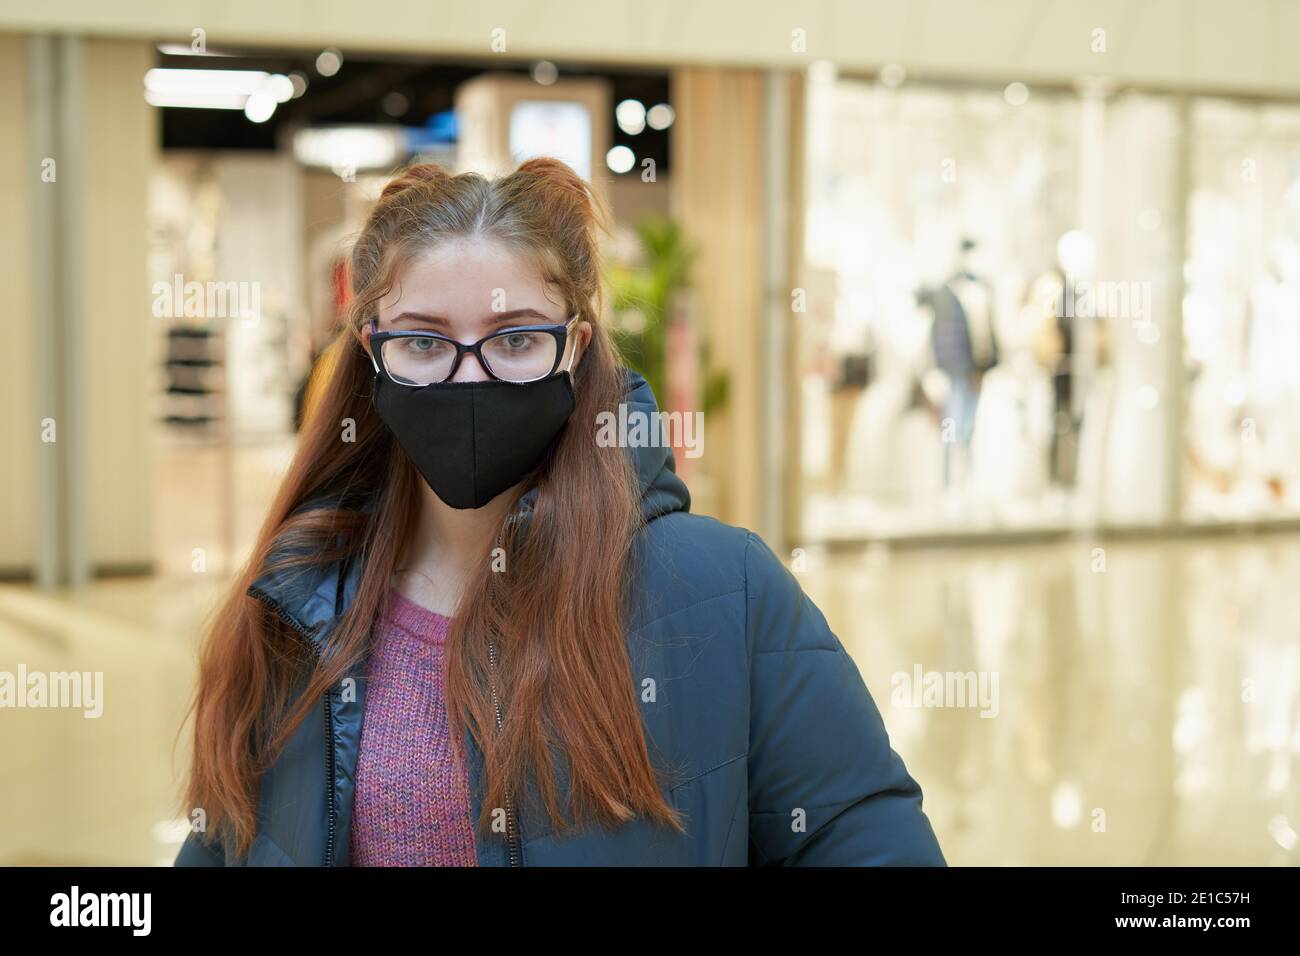 Portrait of a girl in a protective mask in a shopping mall Stock Photo